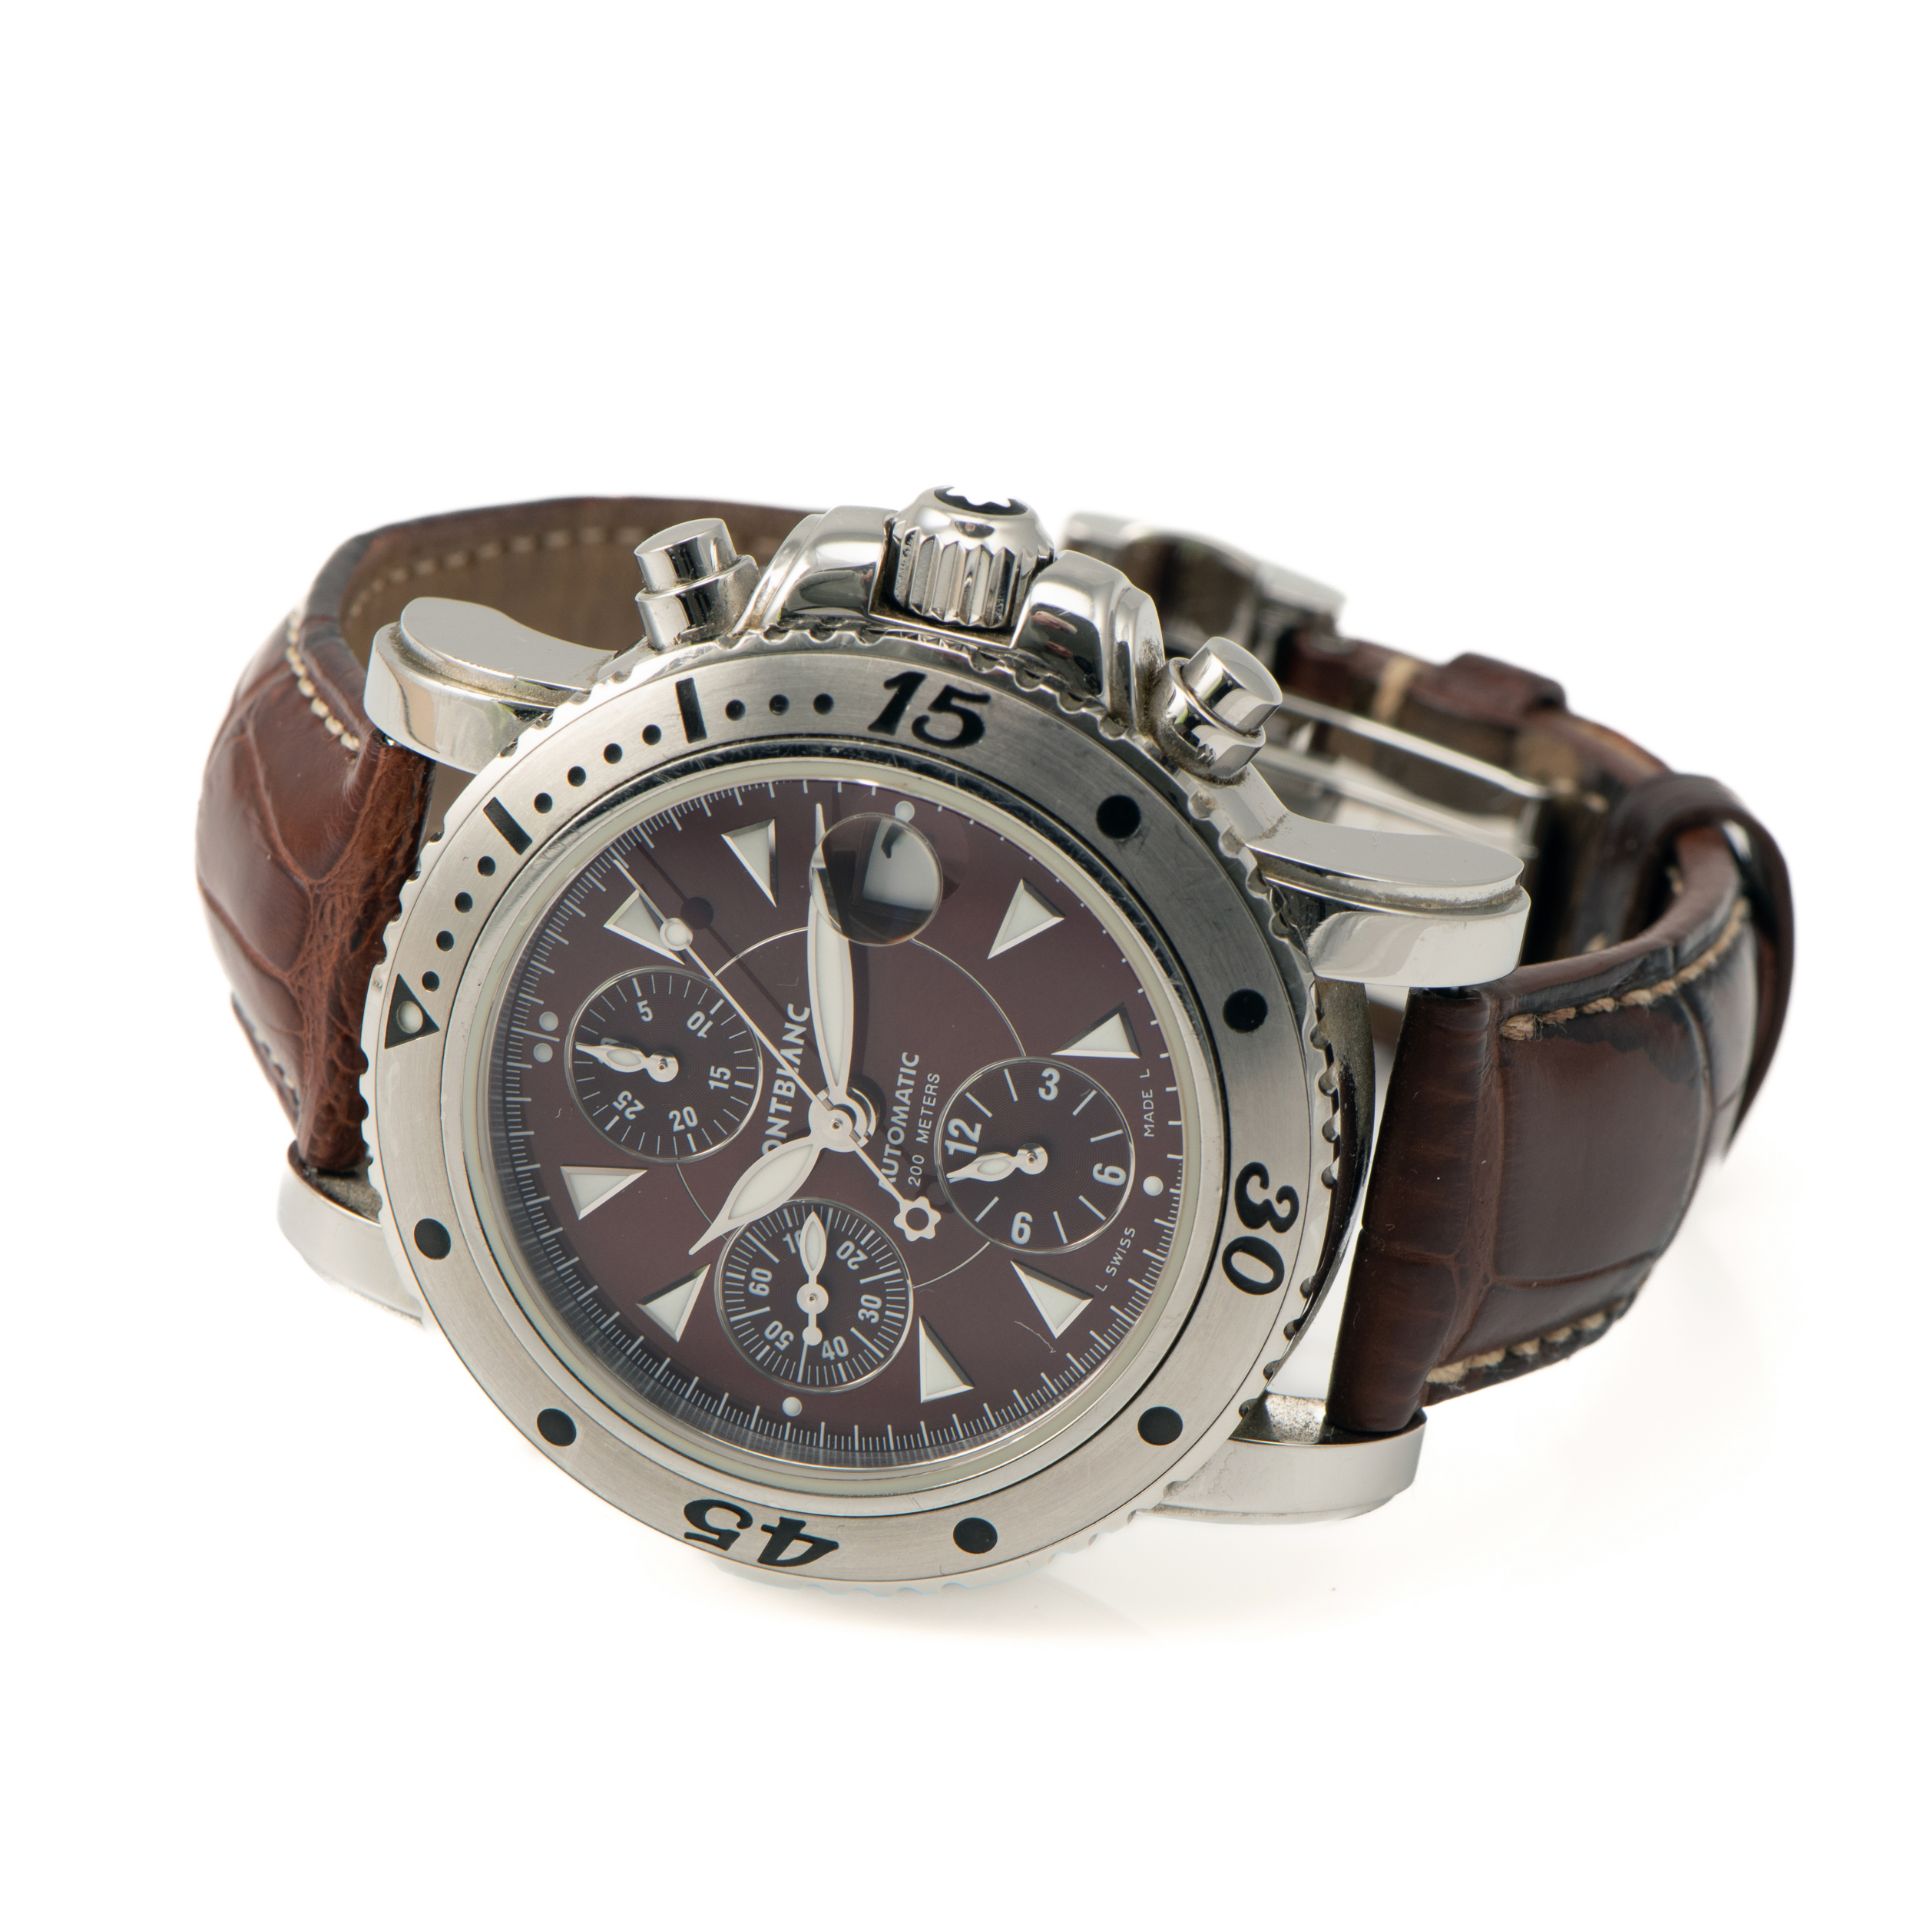 Montblanc Sport Chronograph Brown Dial - Image 2 of 4